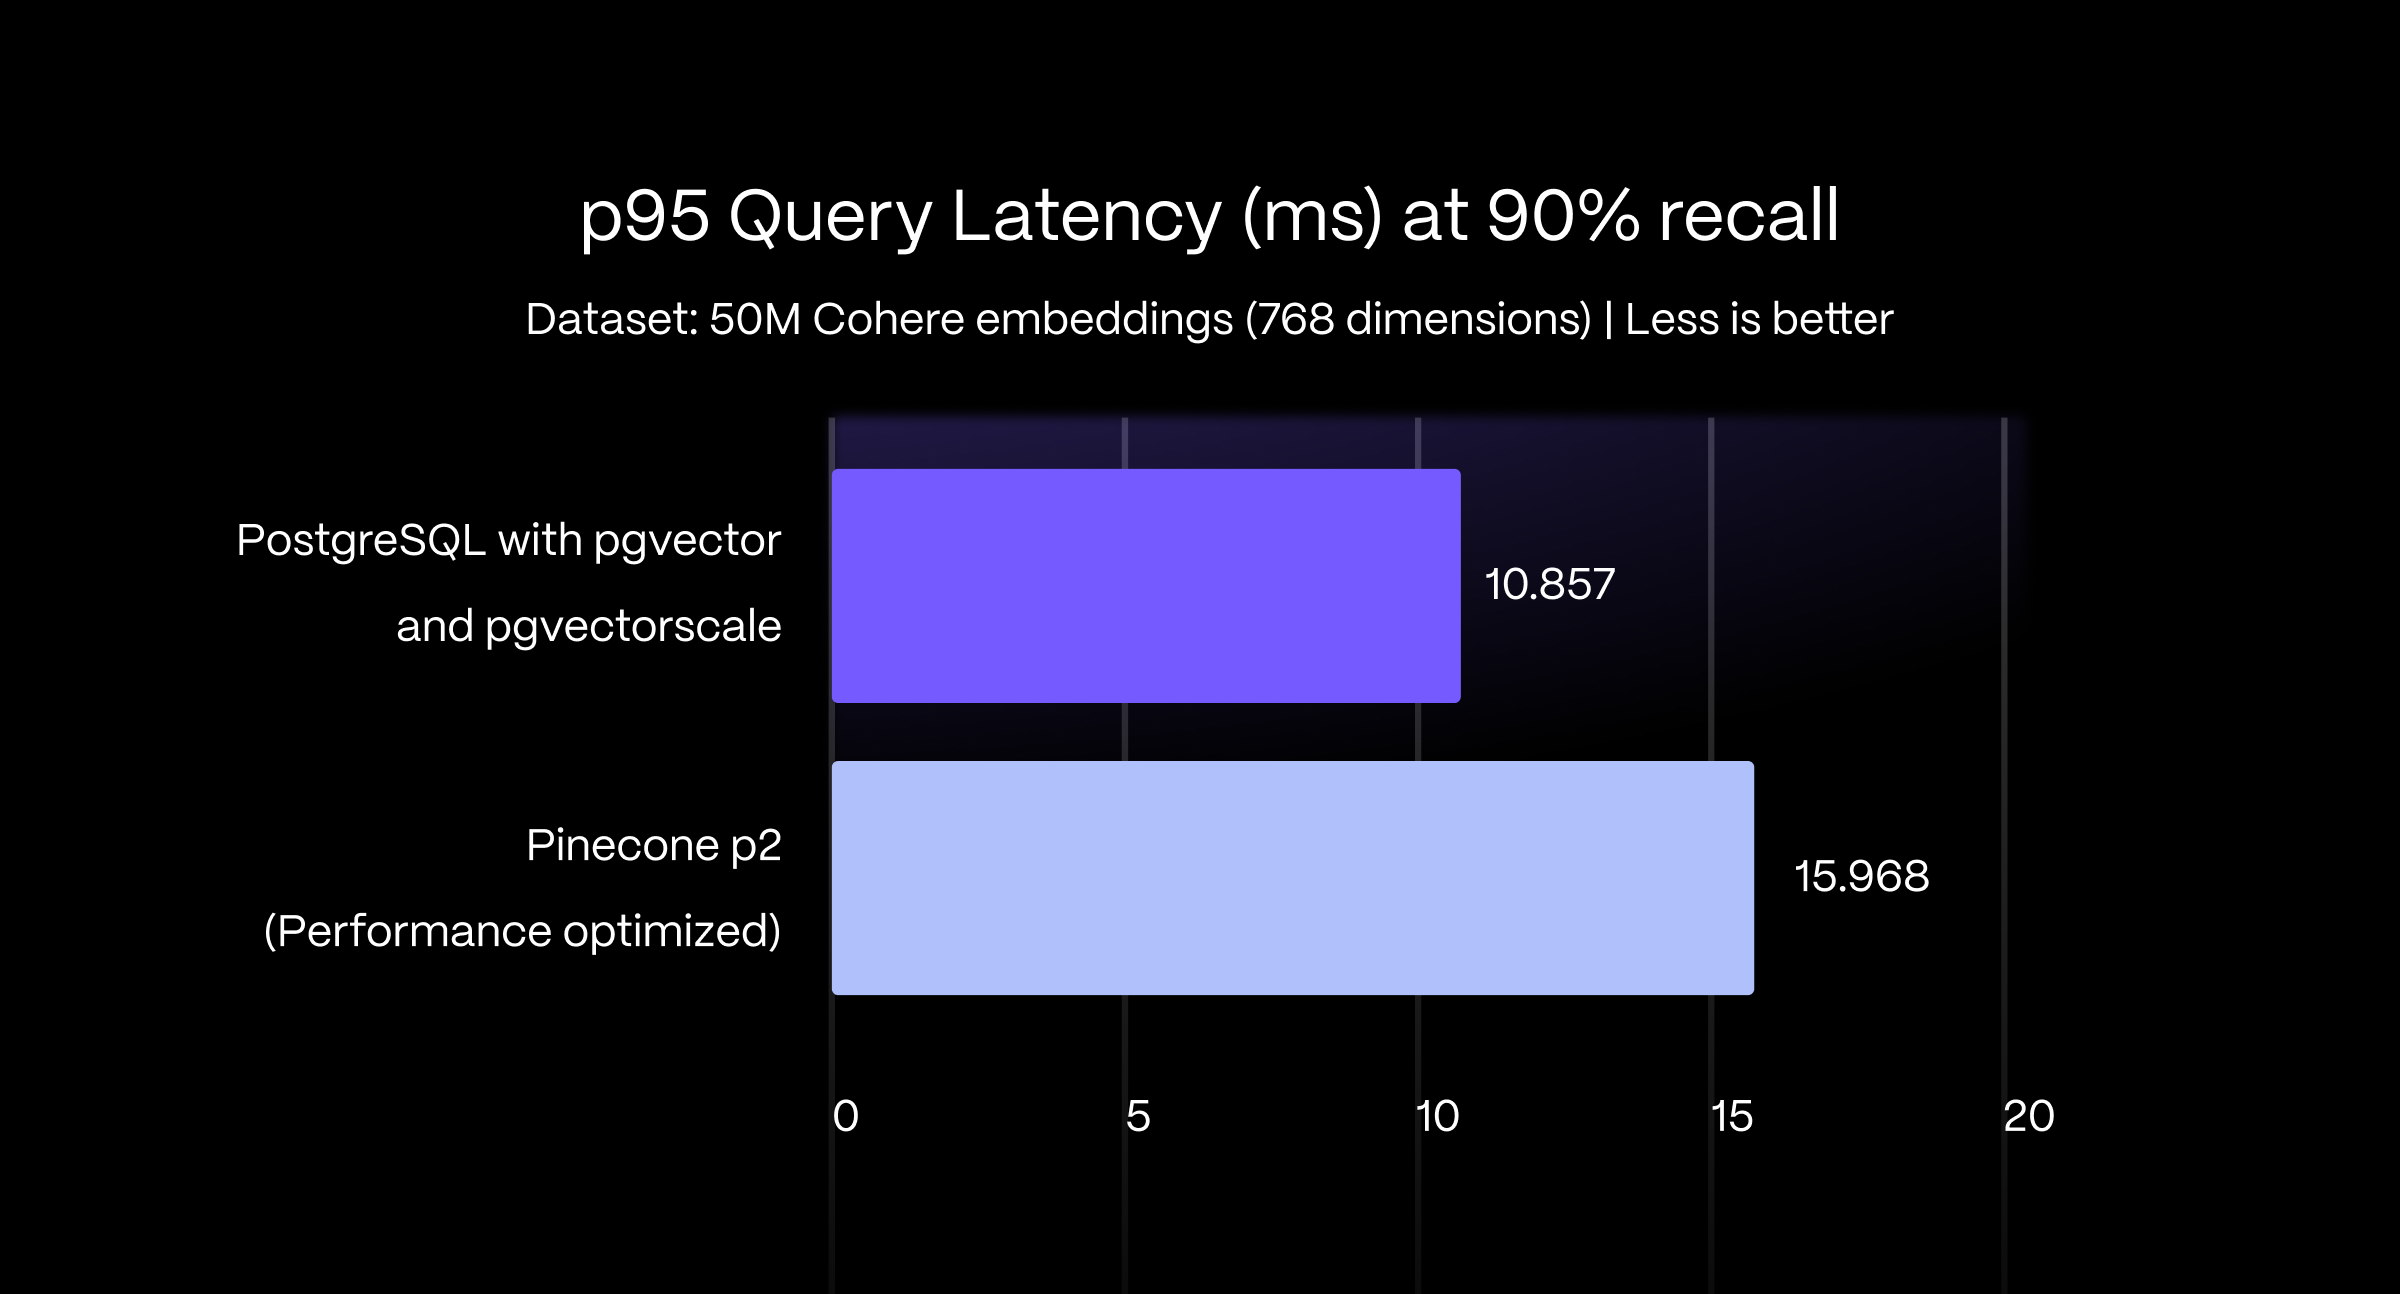 A bar graph showing that PostgreSQL achieves 1.4x lower p95 latency for approximate nearest neighbor queries at 90 % recall